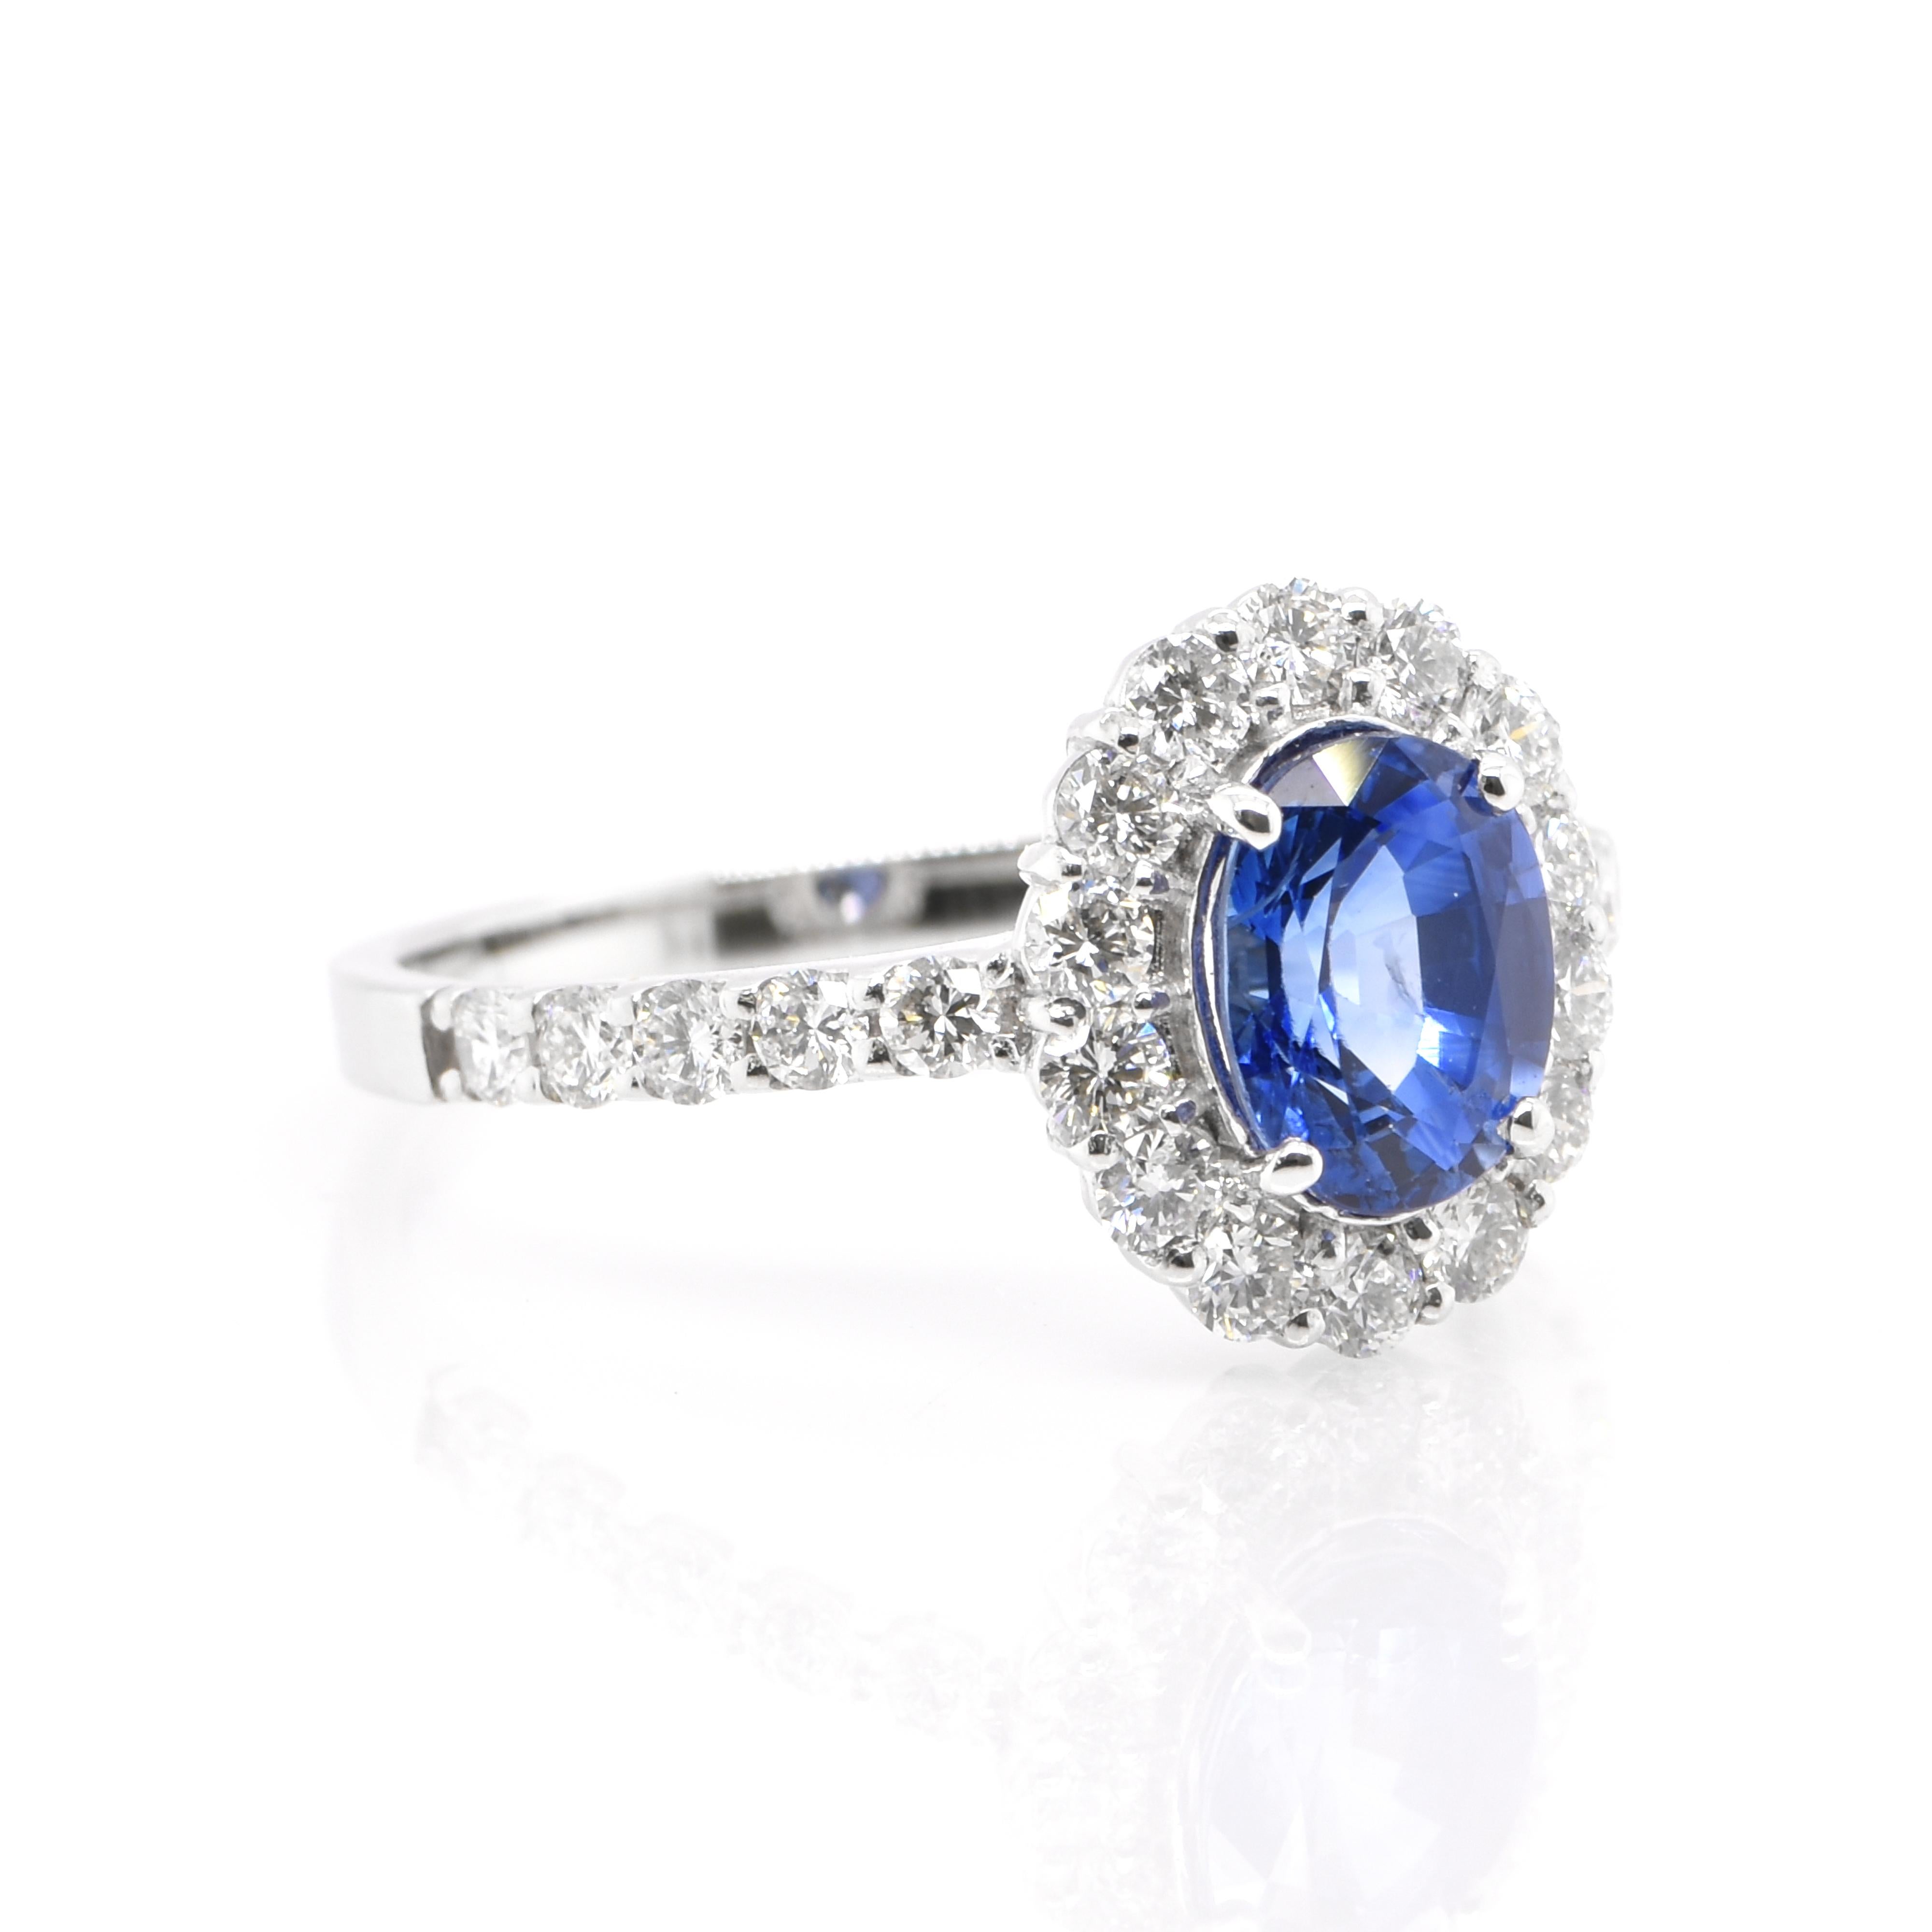 Modern 1.44 Carat, Natural Sapphire and Diamond Diana-Style Ring set in Platinum